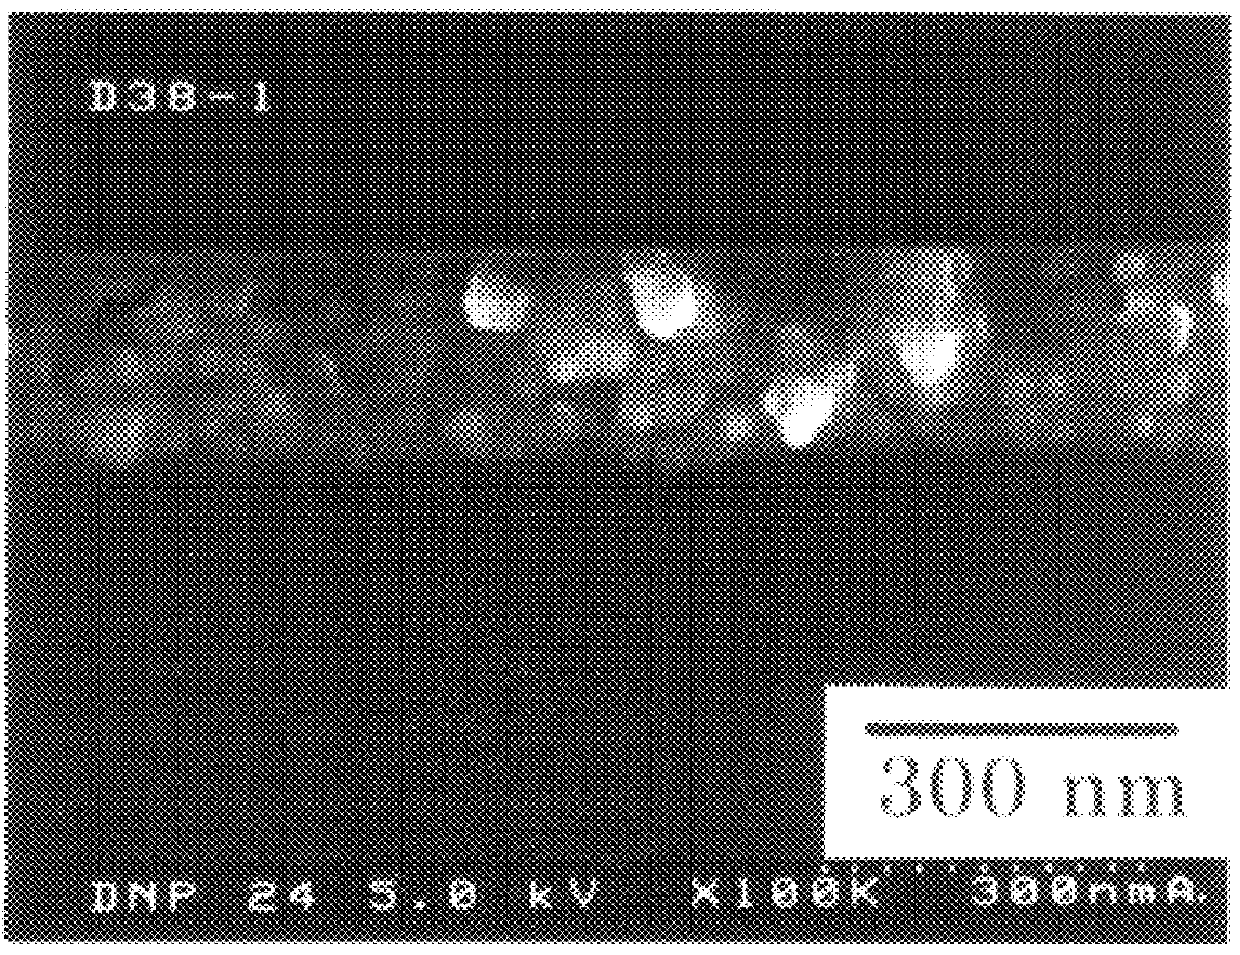 Metal complex solution, photosensitive metal complex solution, and method for forming metallic oxide films